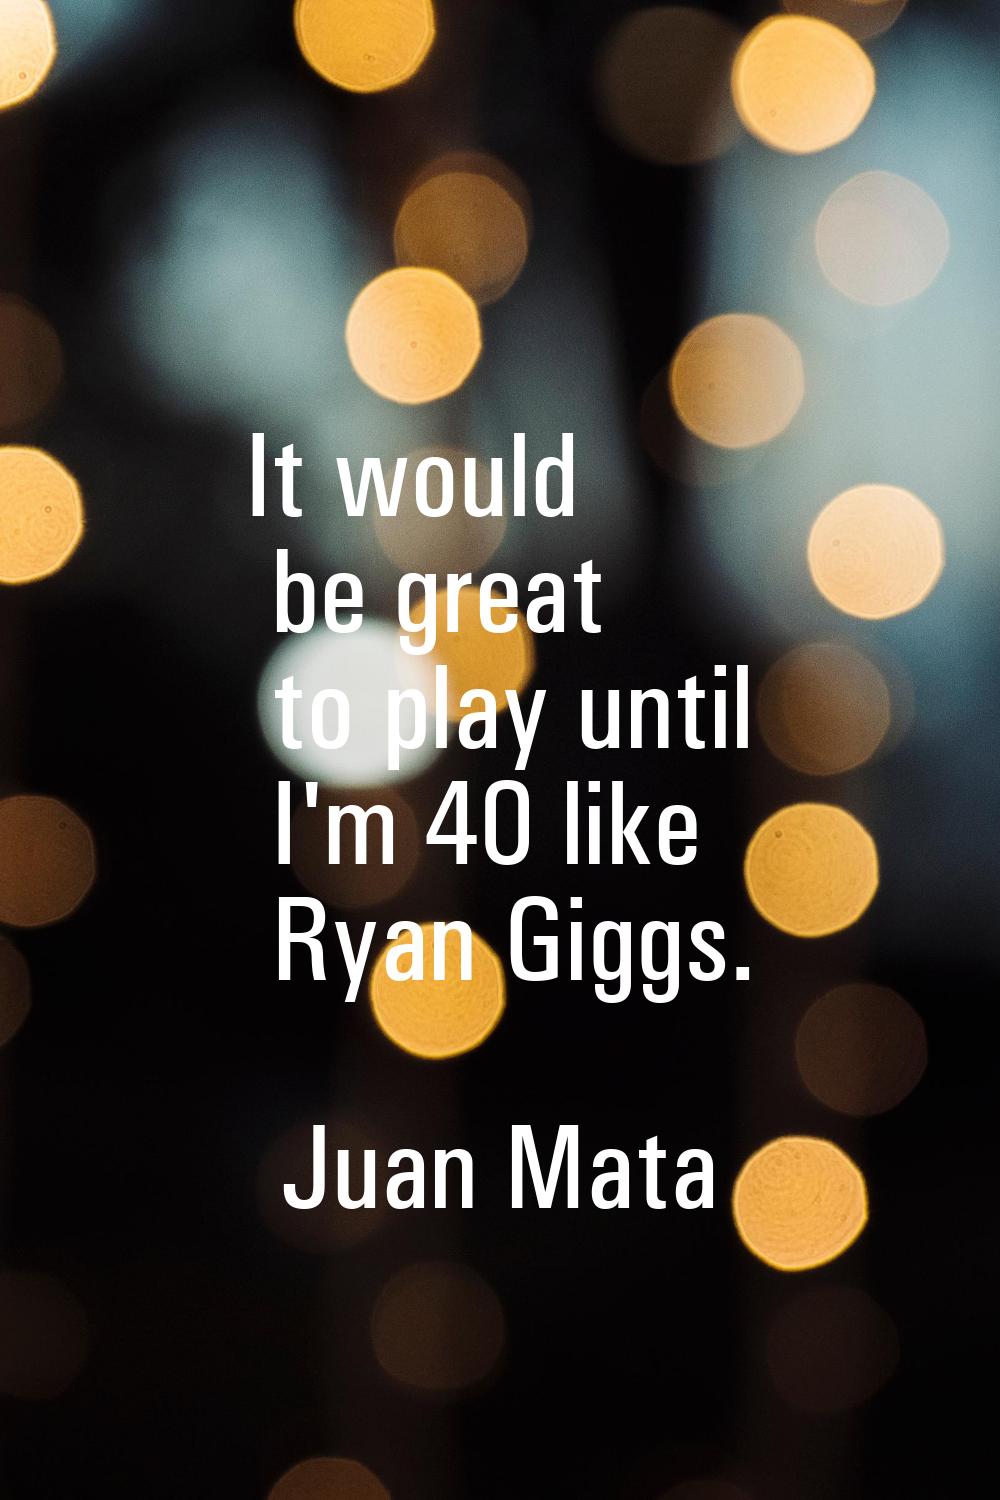 It would be great to play until I'm 40 like Ryan Giggs.